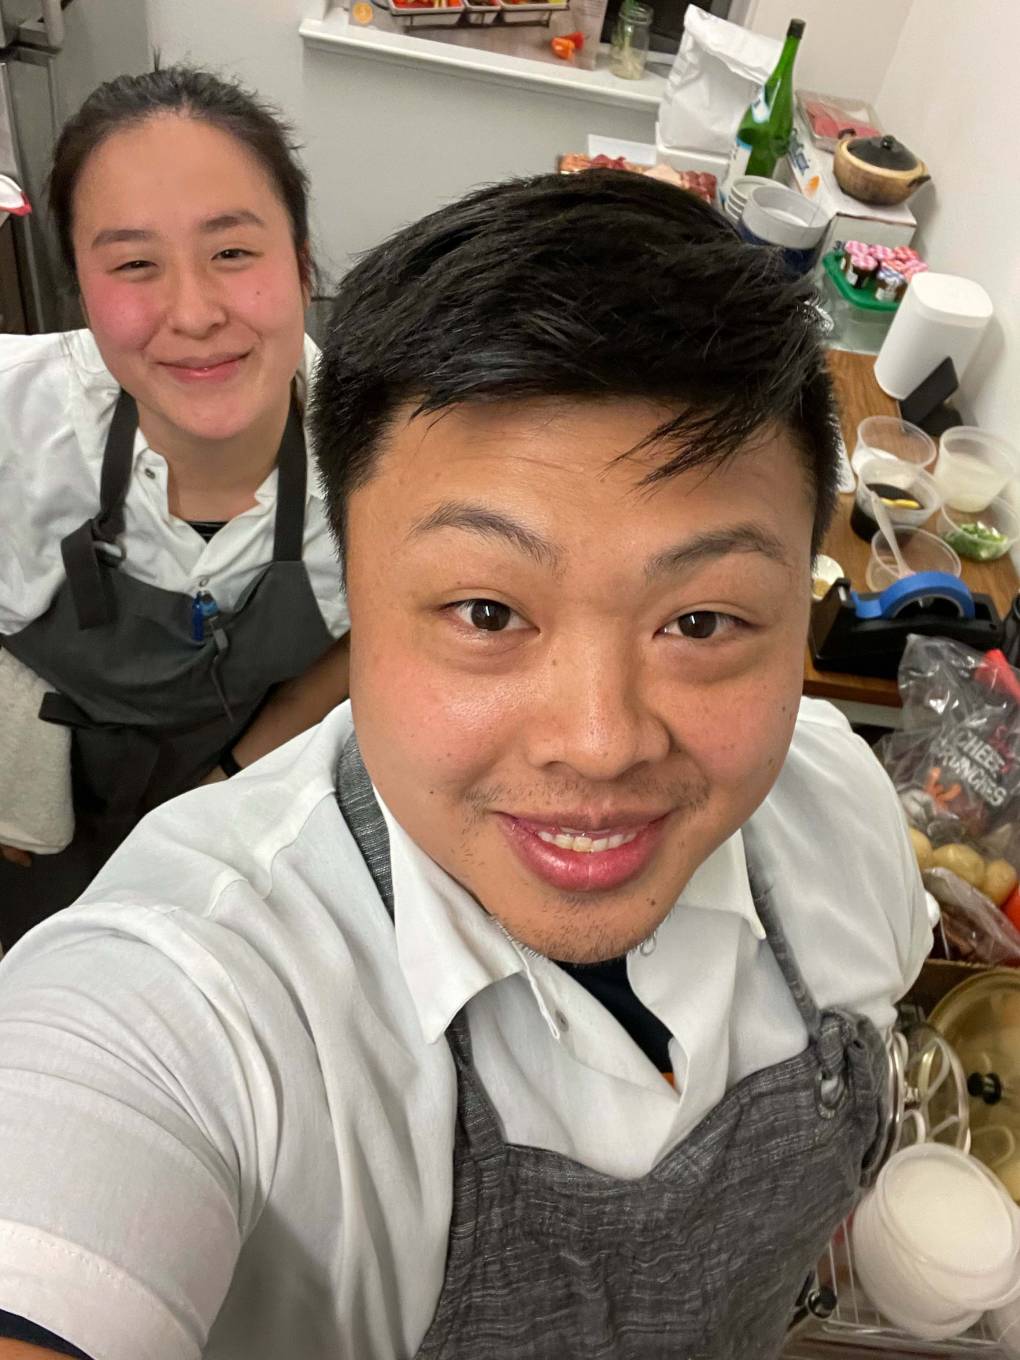 Will Thanapisitikul (left) and Alex Chin in the kitchen